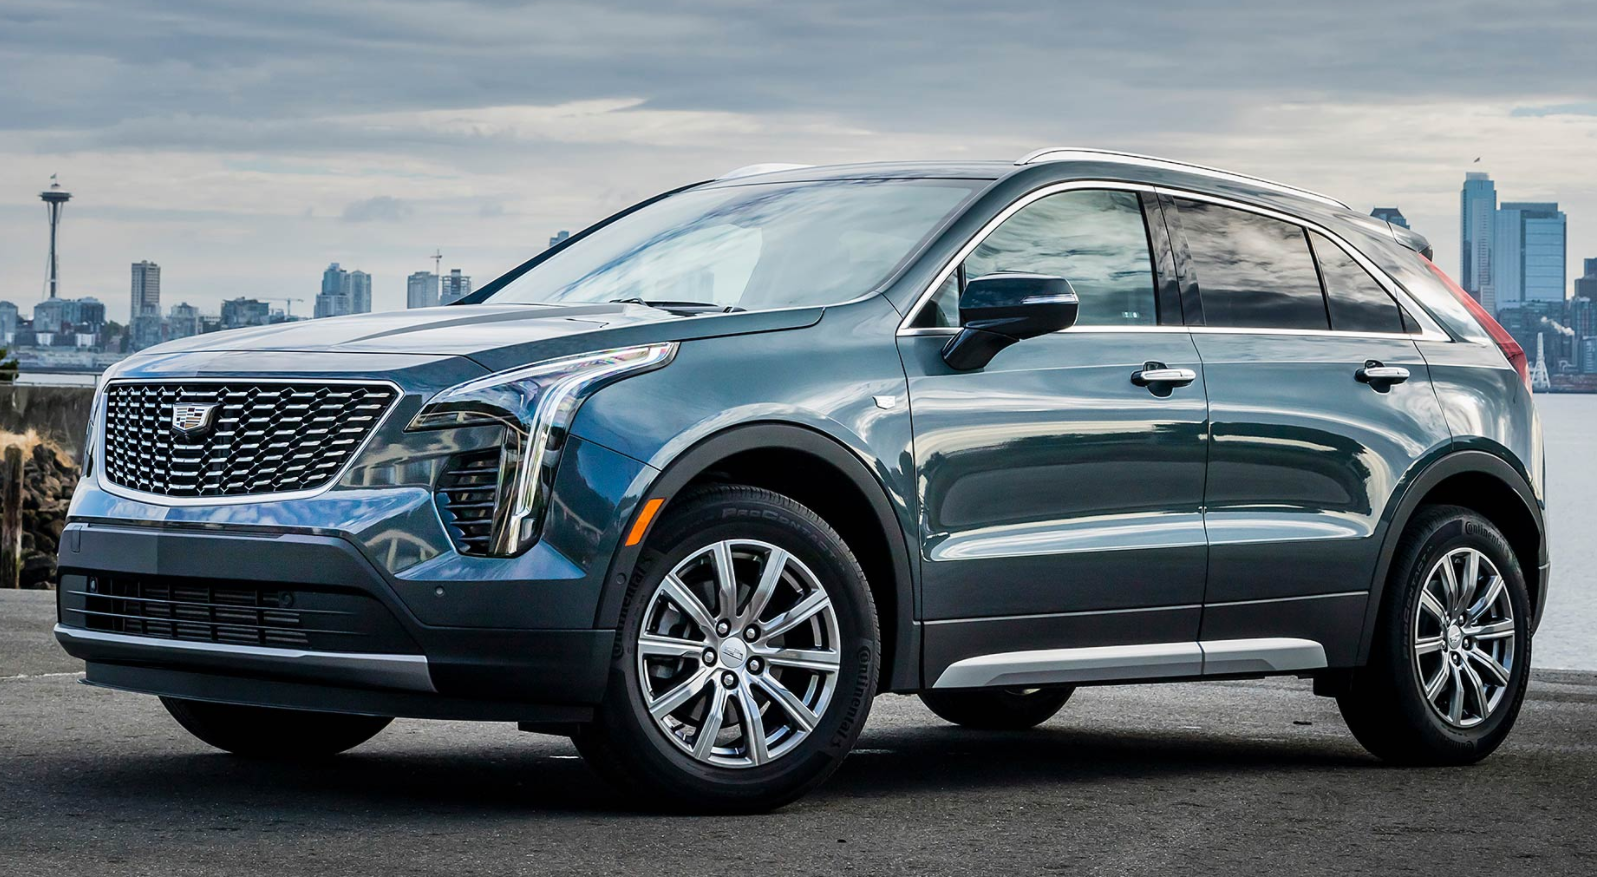 New 2022 Cadillac XT4 Redesign